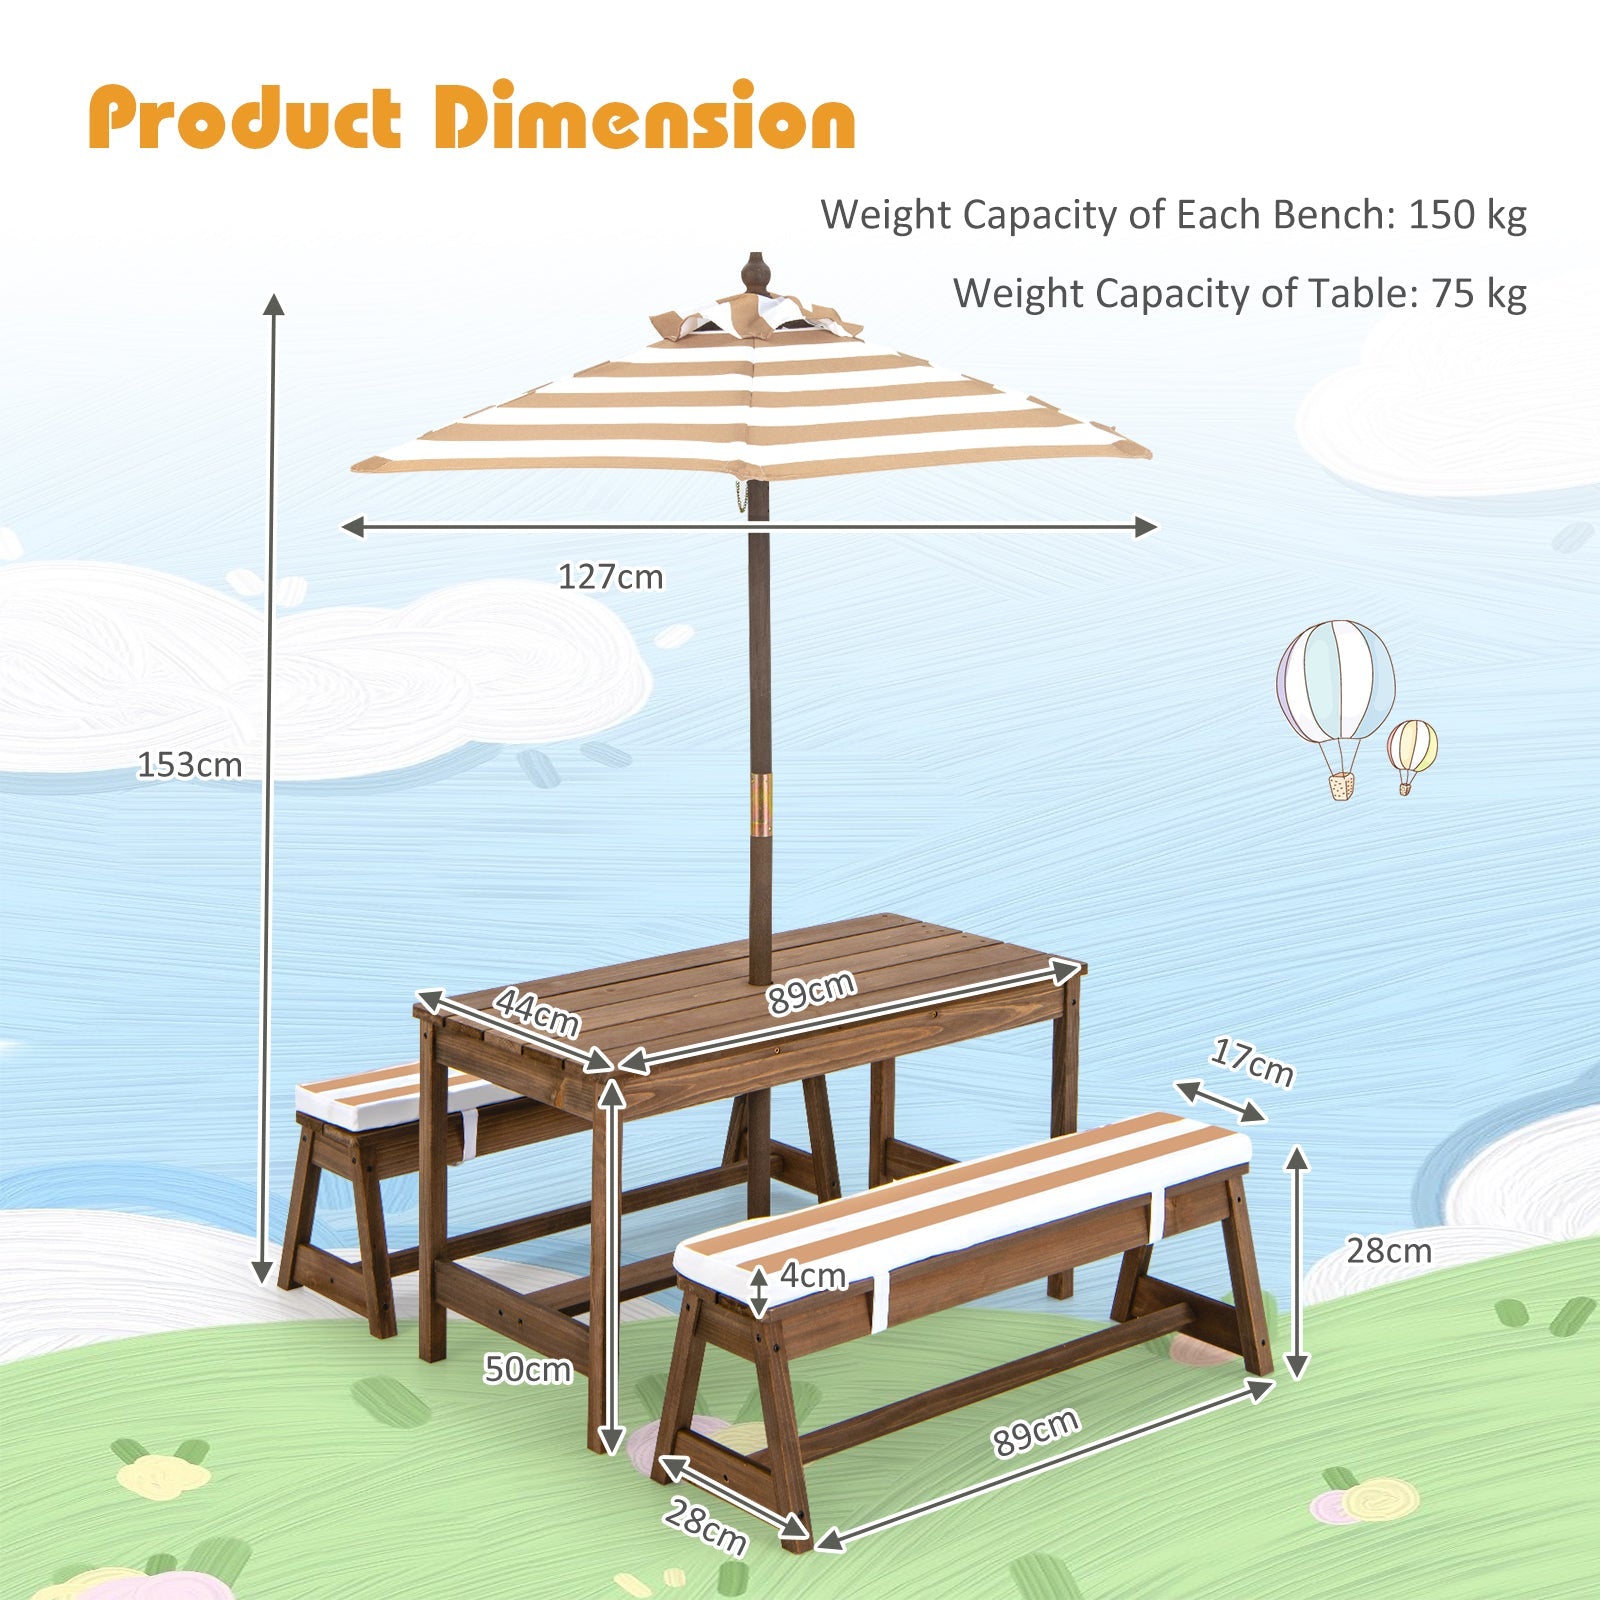 Children's Play Table: Bench Set with Umbrella & Cushions - Comfortable Fun